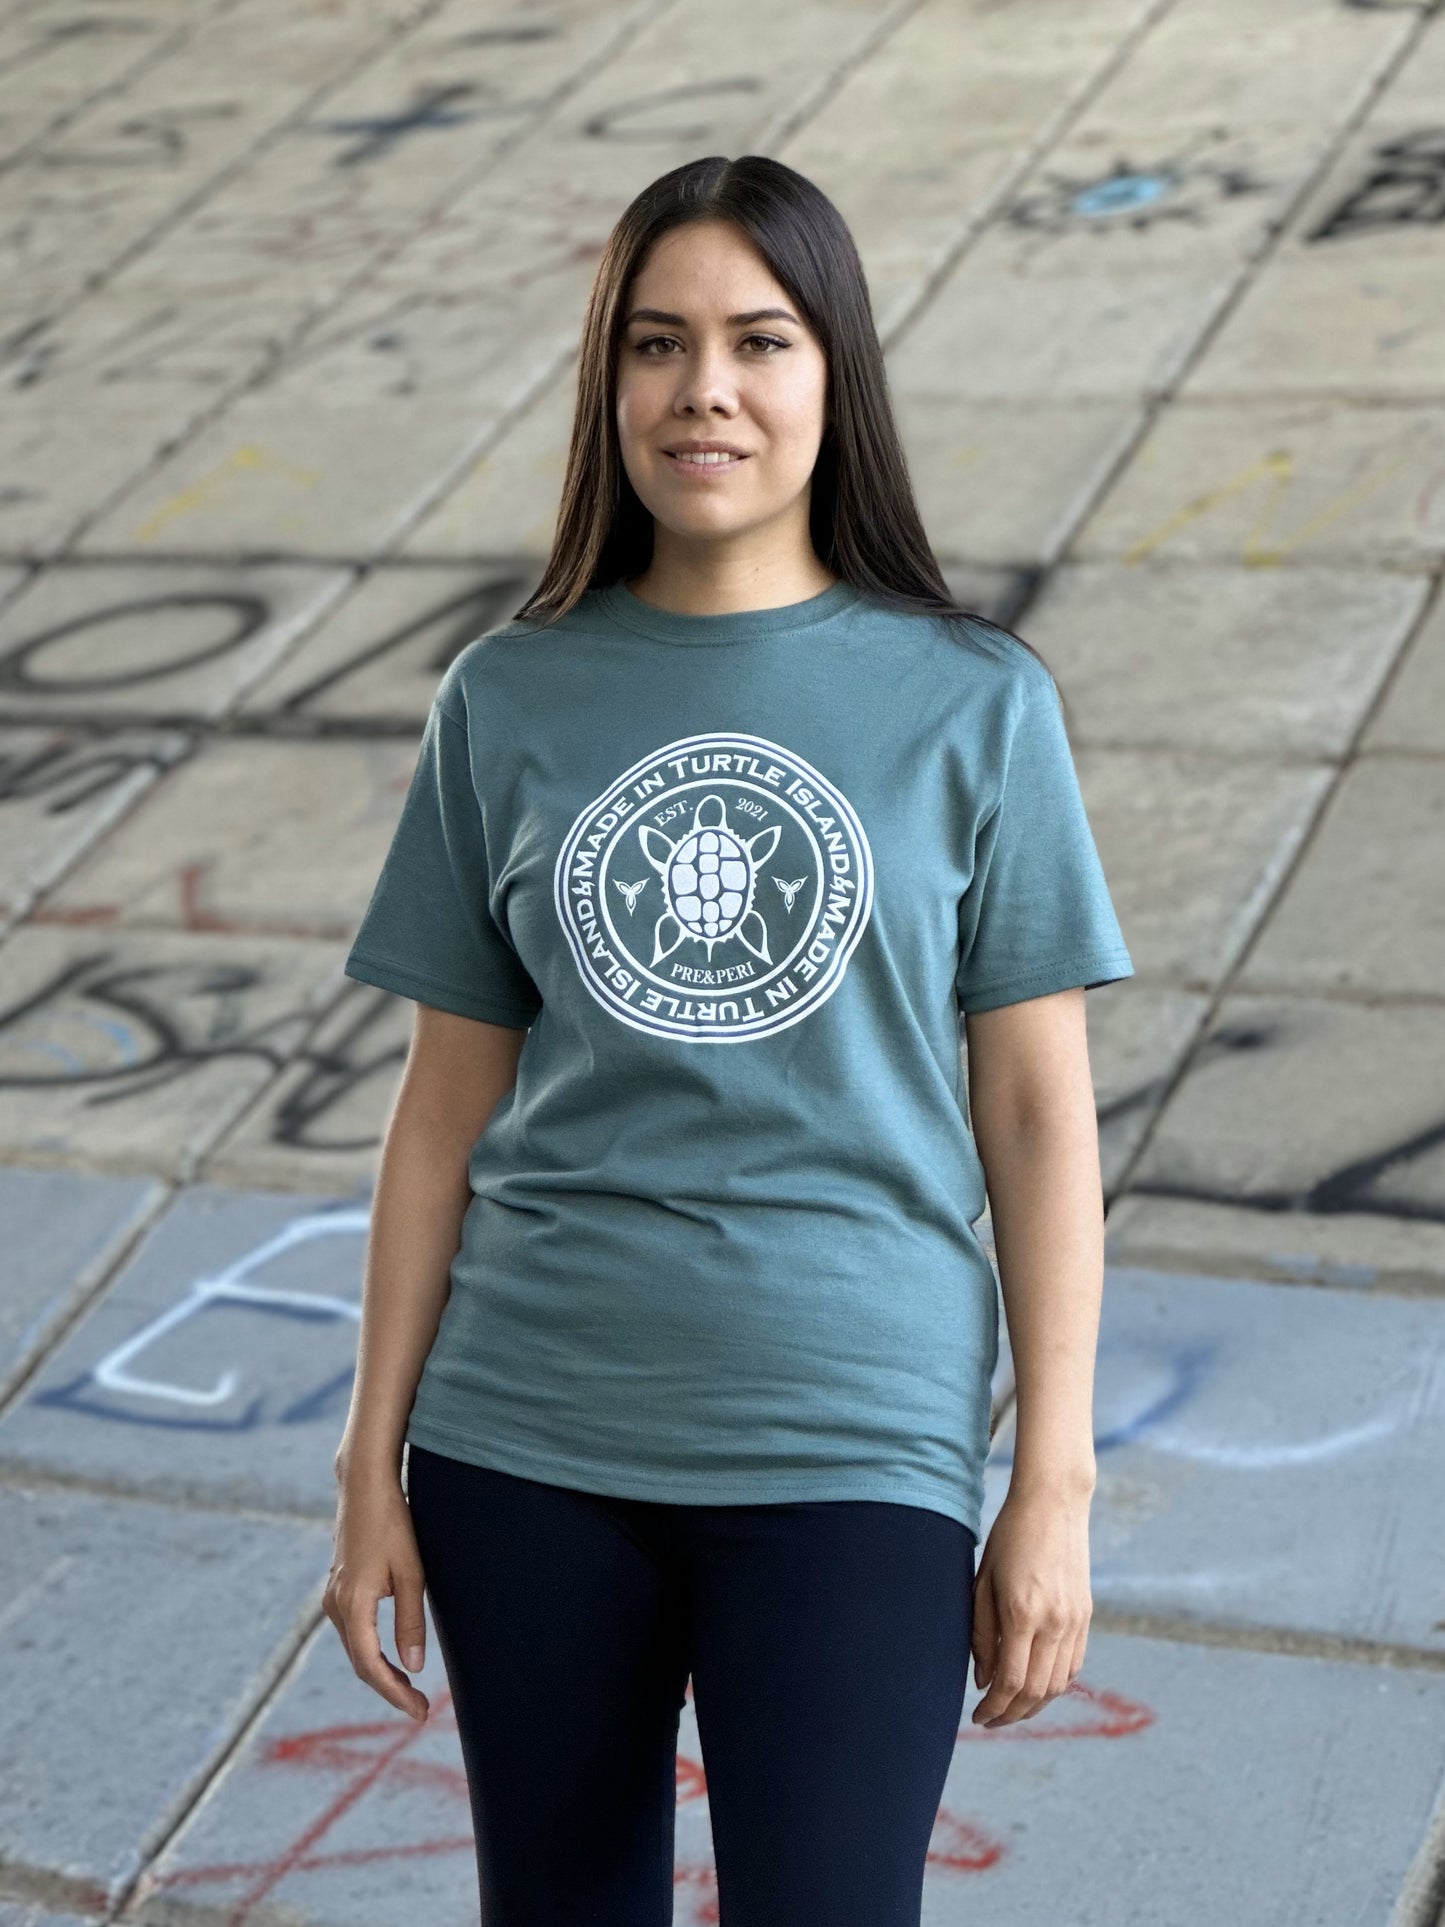 A woman wearing a sage green t-shirt with a white print of a turtle with the words "Made in Turtle Island" around it.